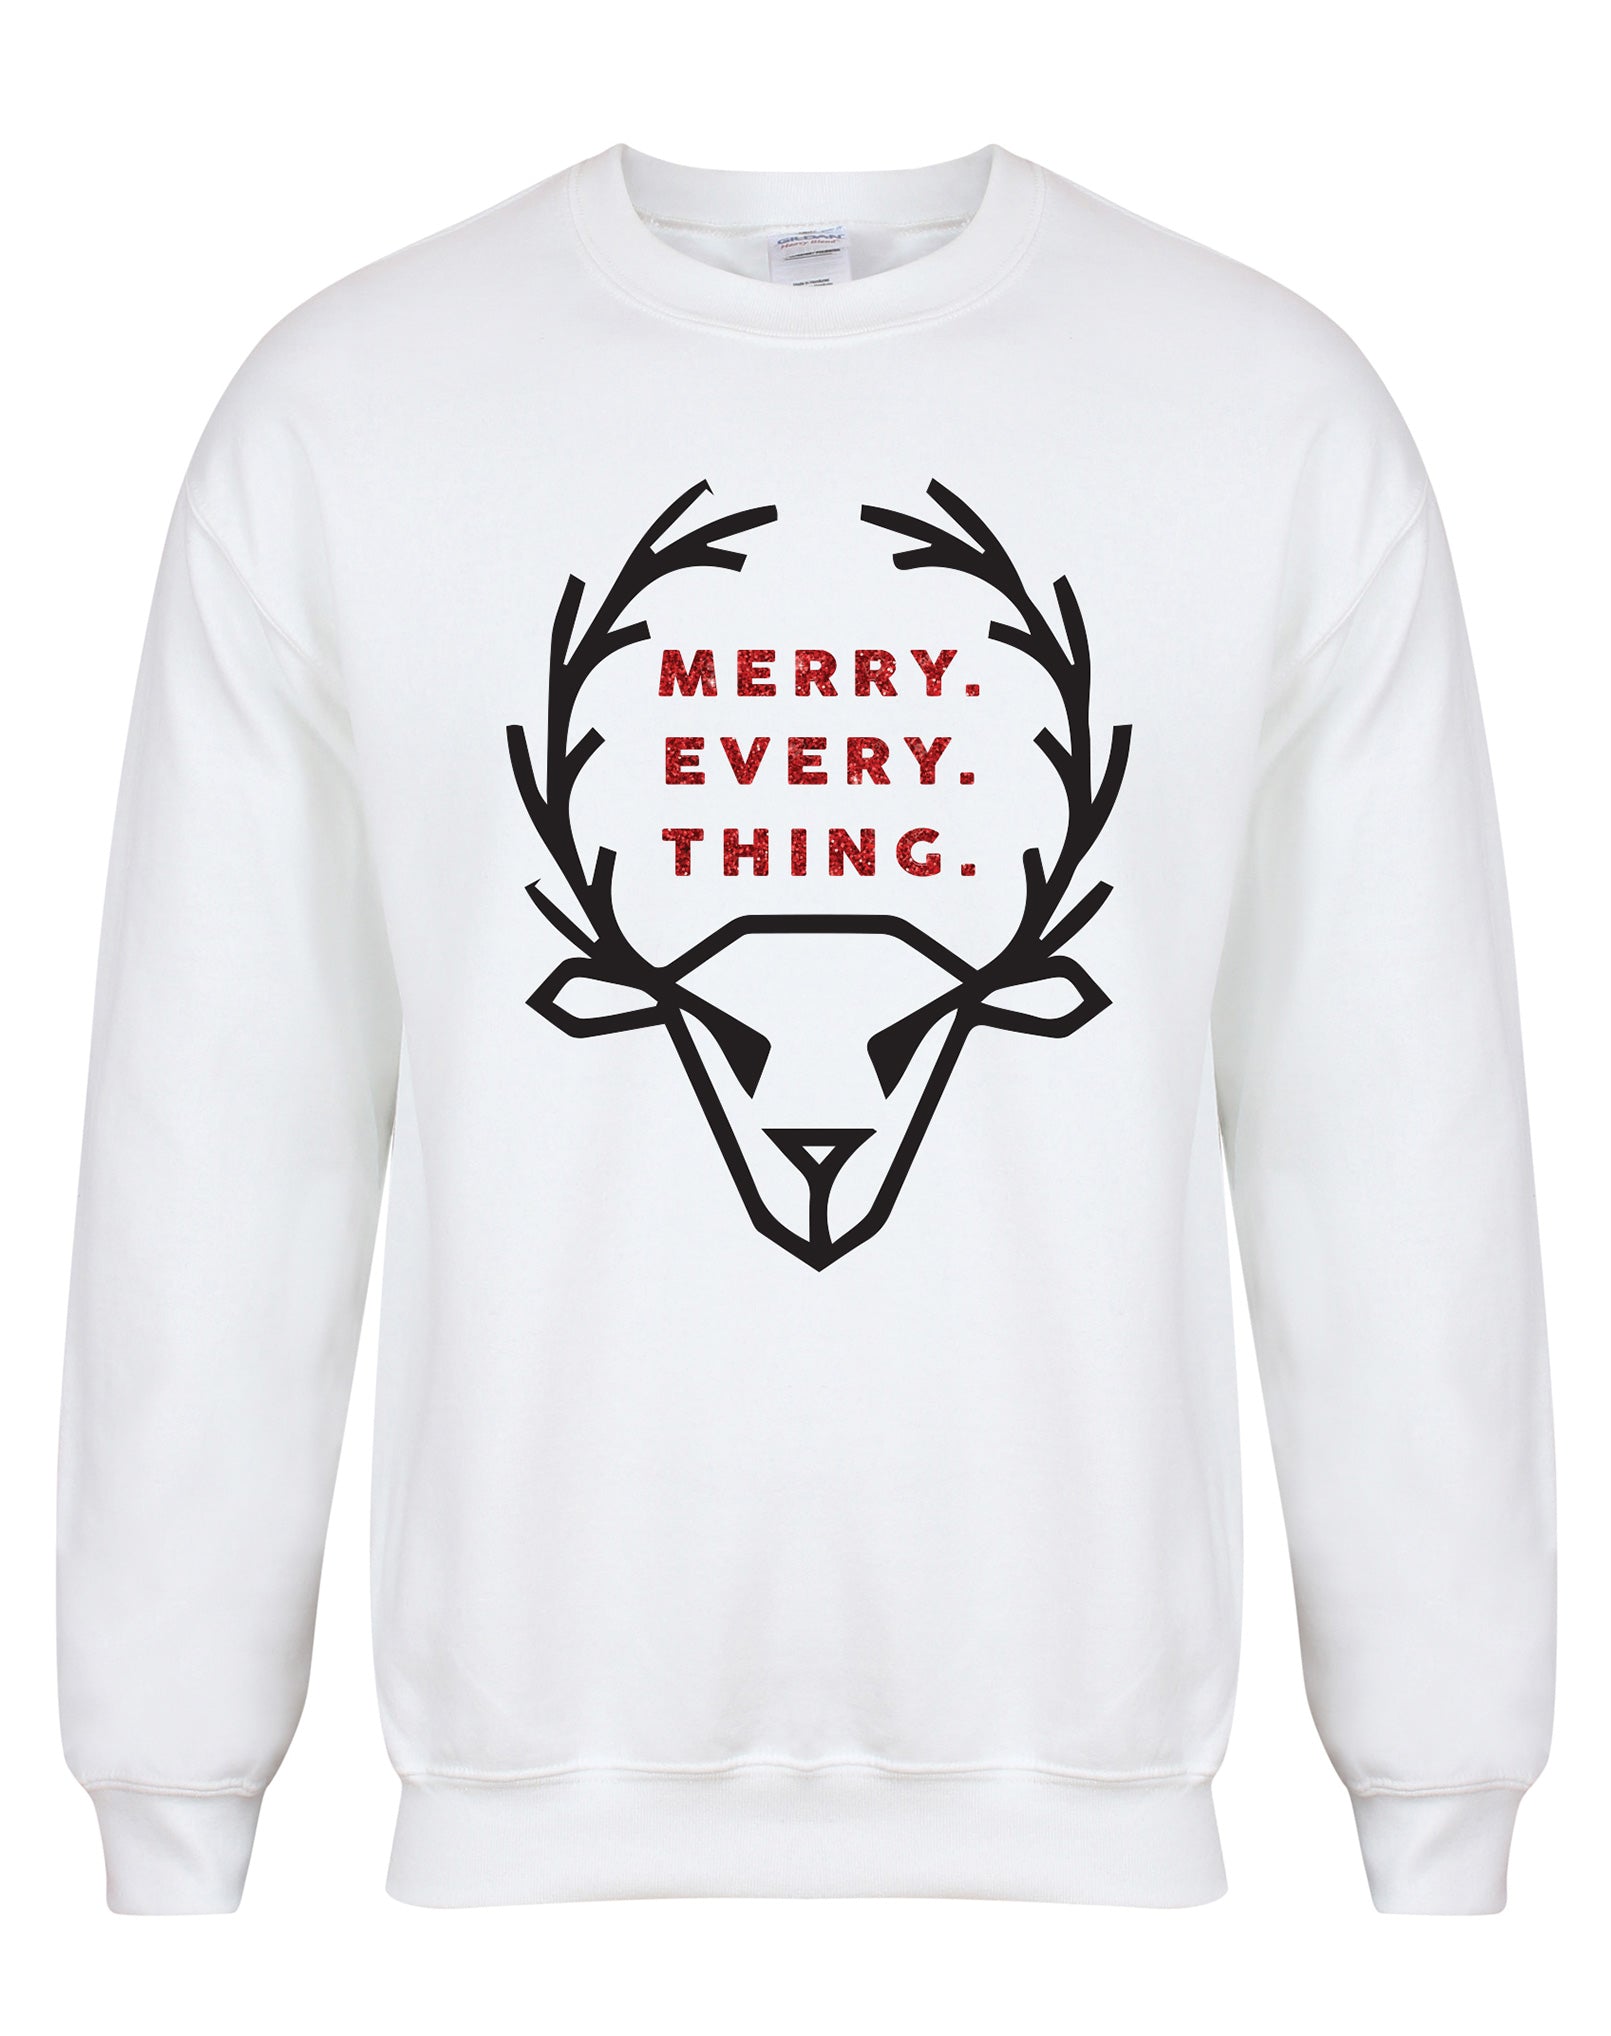 Merry. Every. Thing - Unisex Kids Sweater